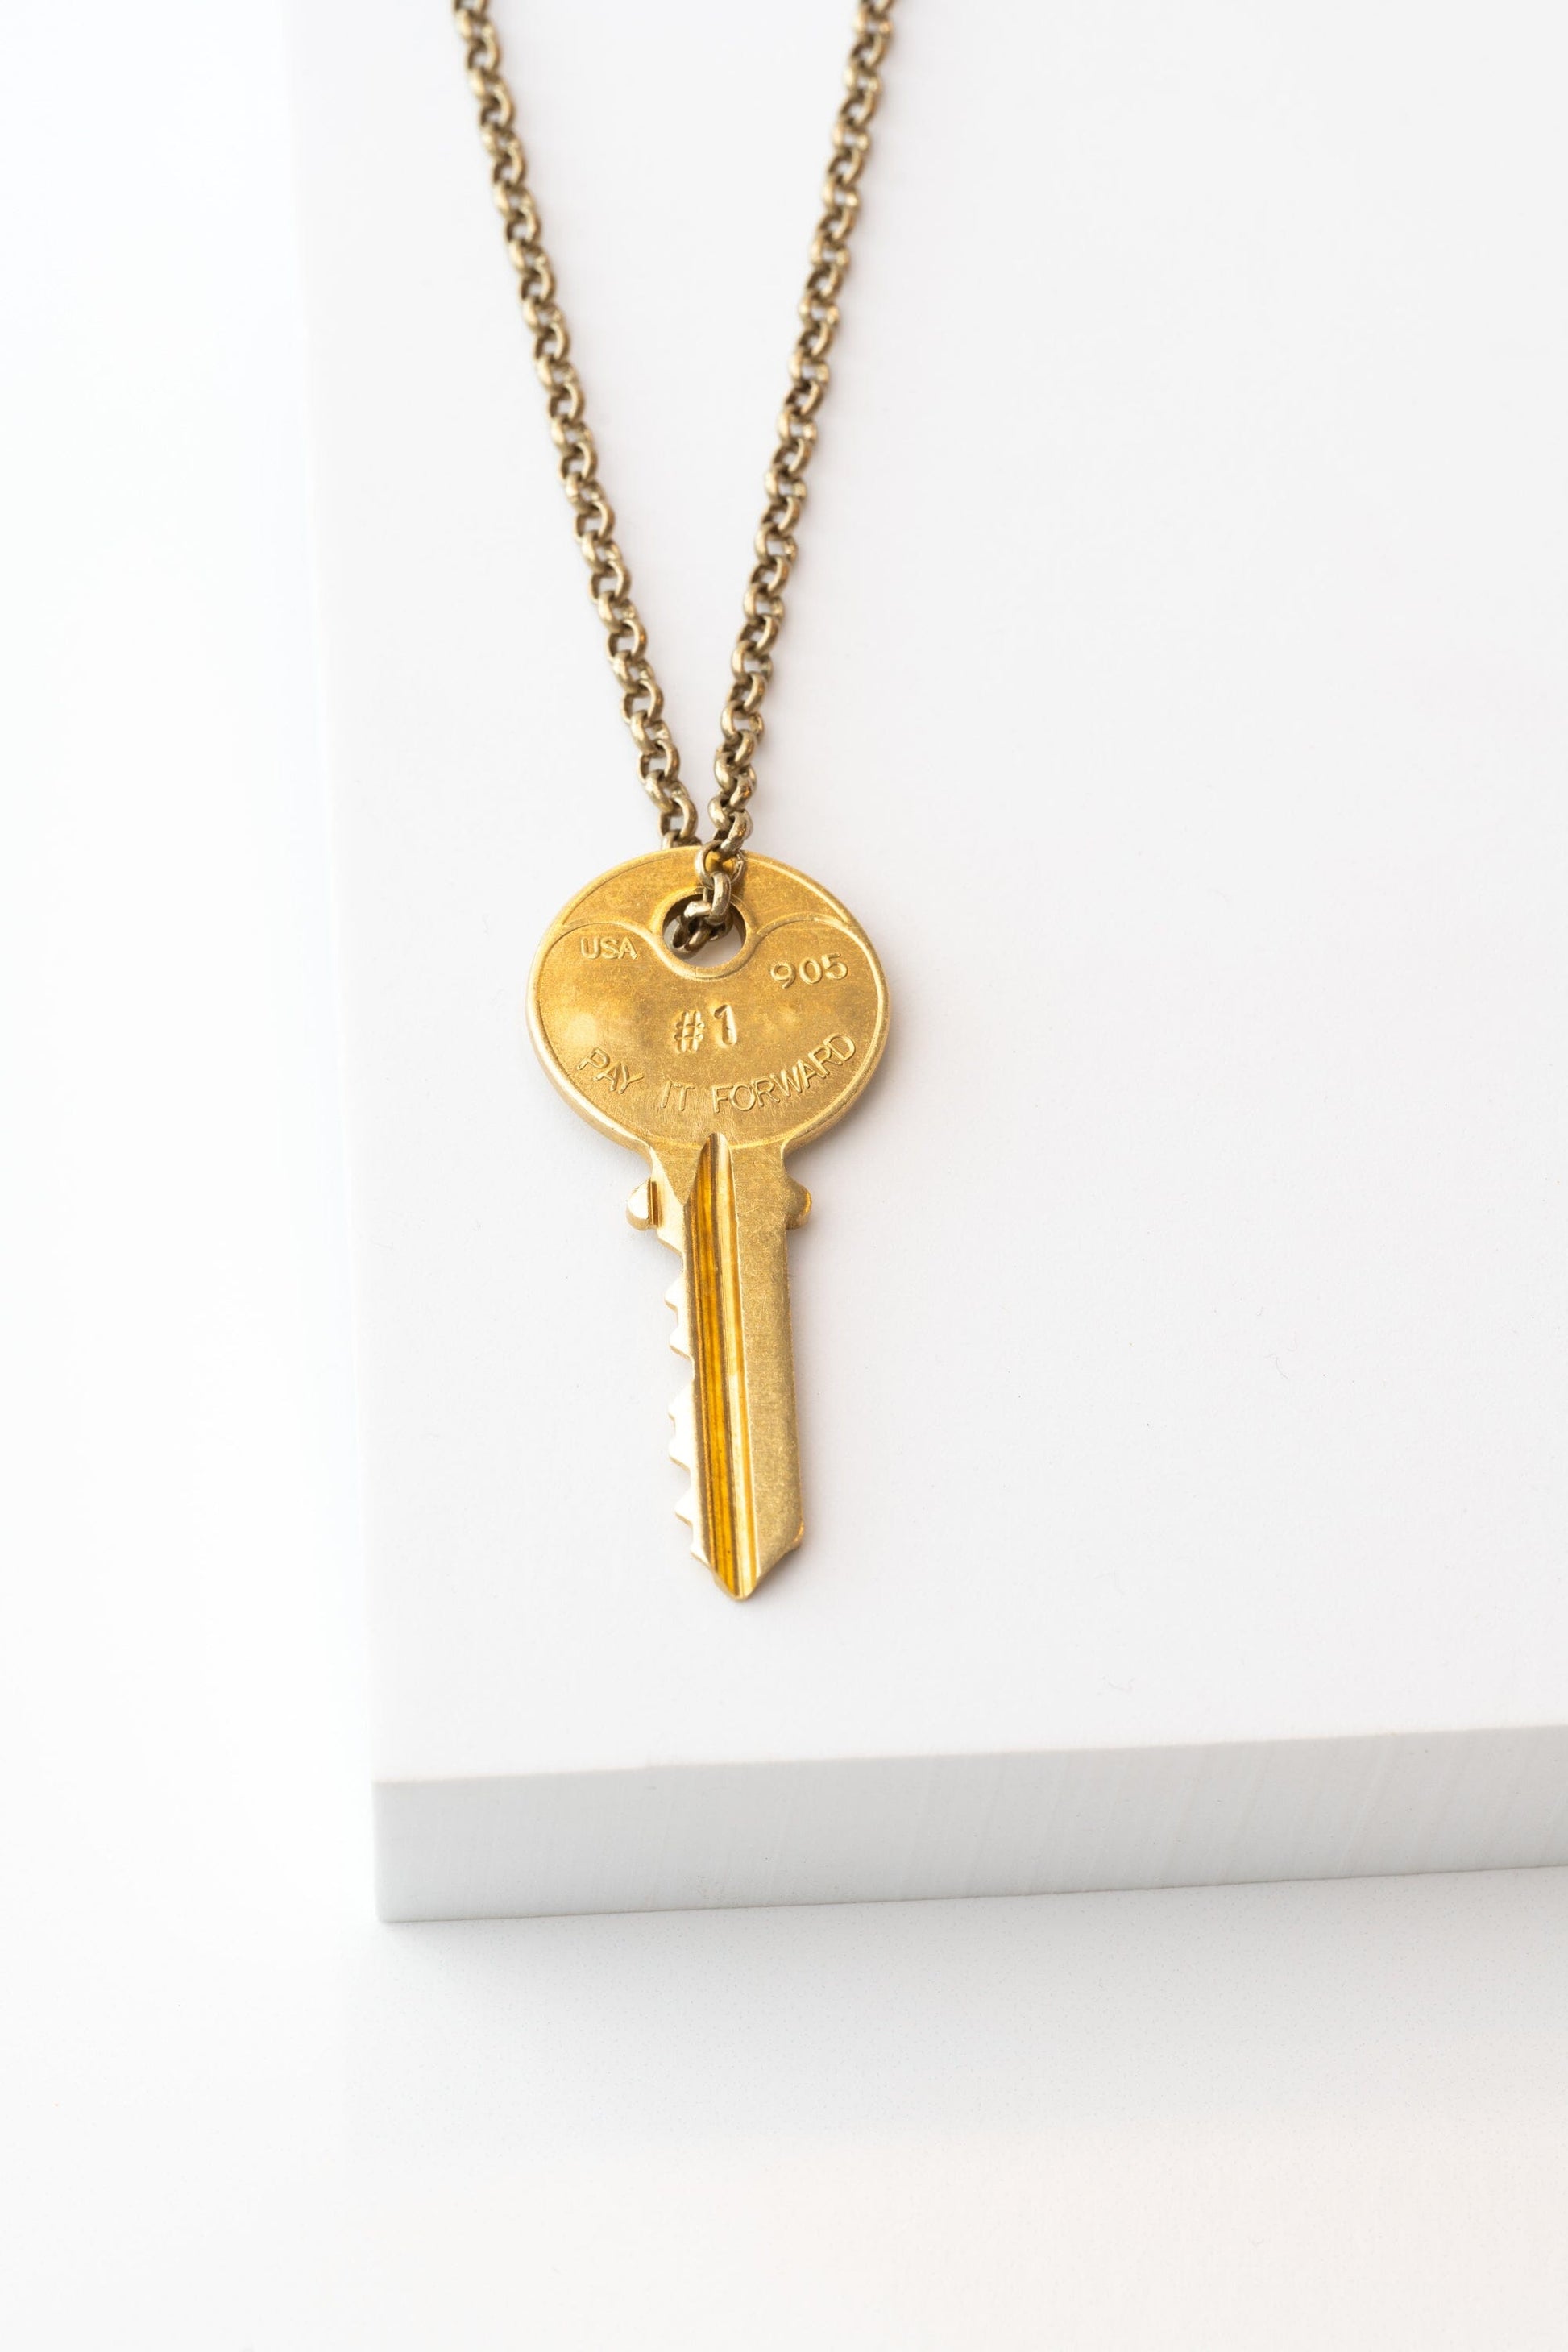 THE ONE Classic Key Necklace Necklaces The Giving Keys 